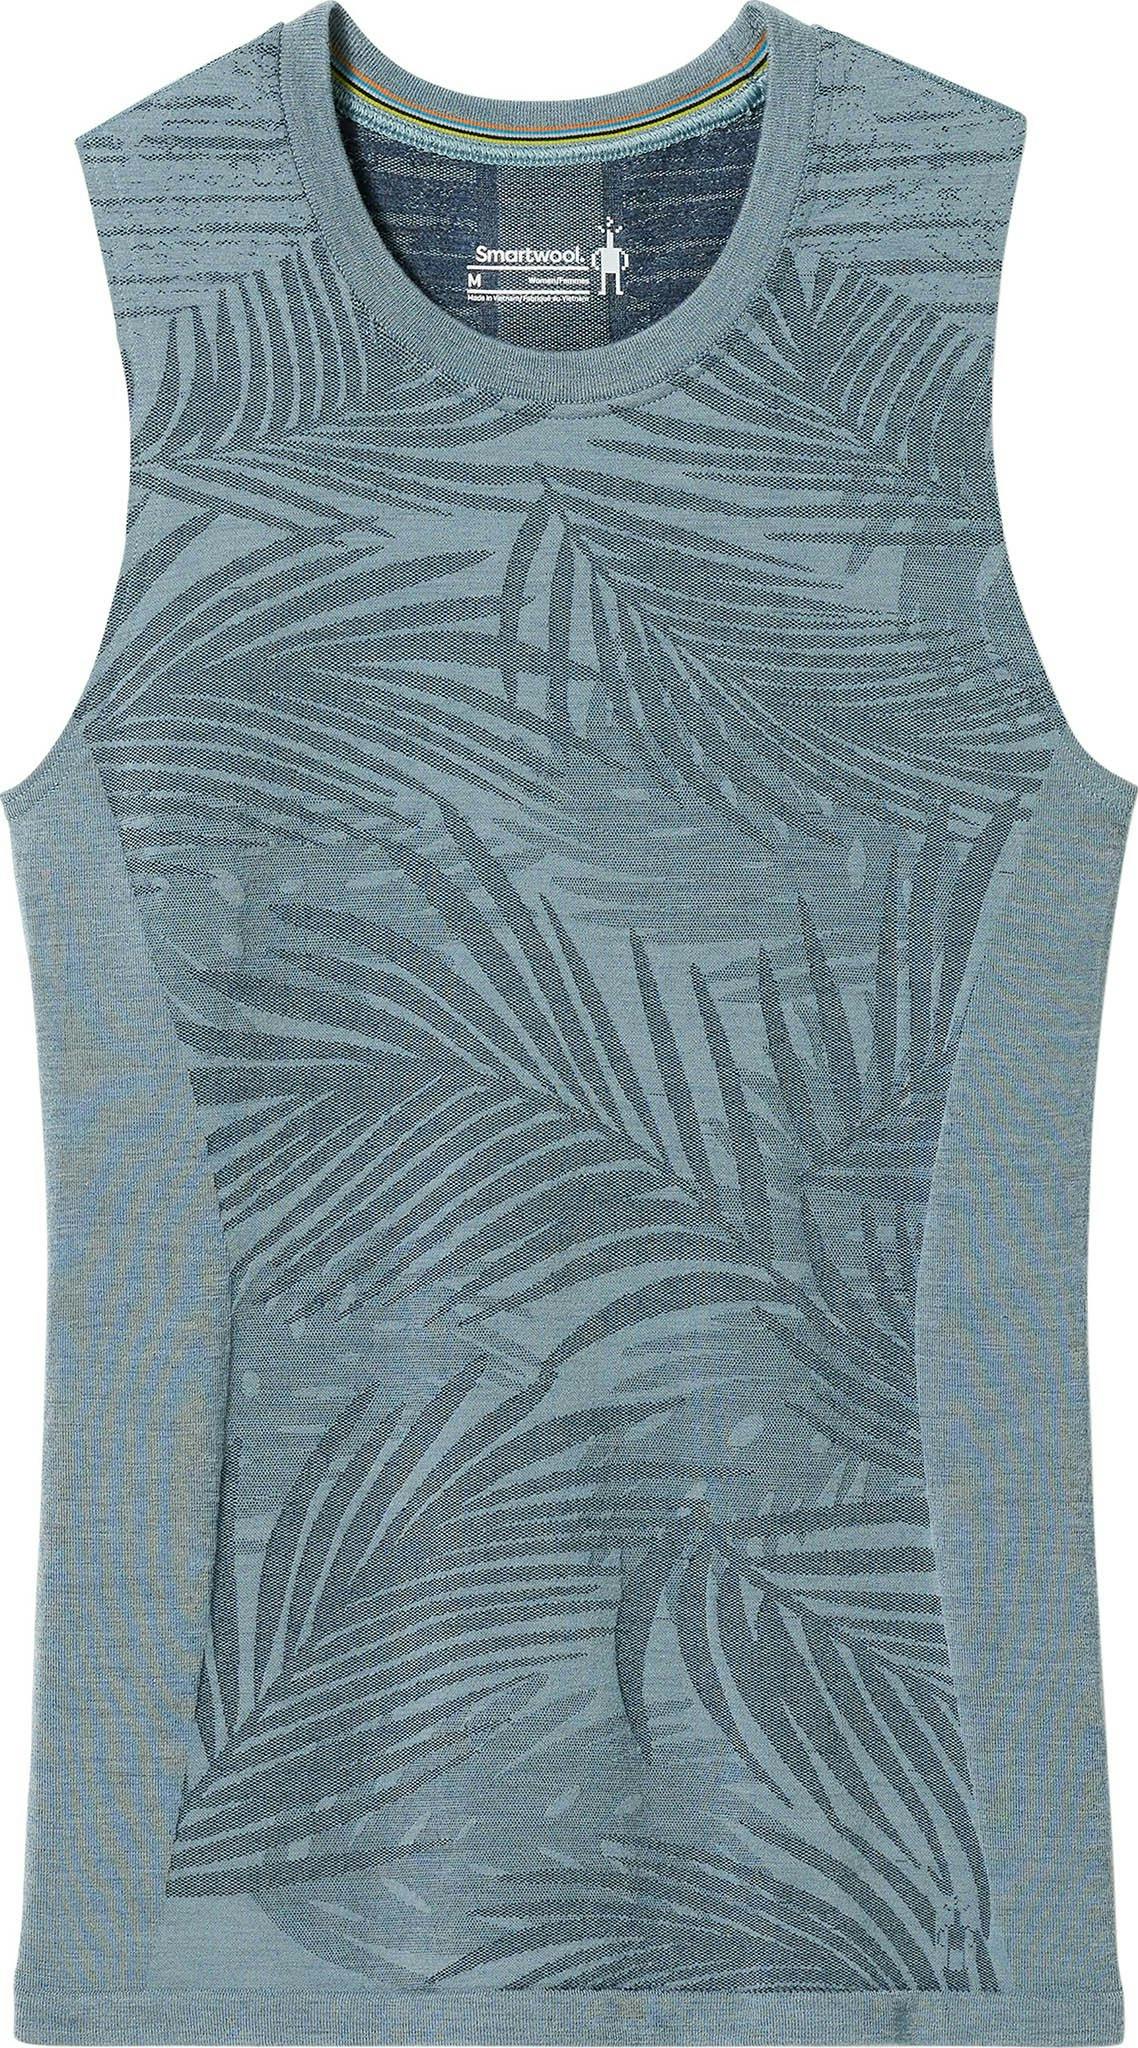 Product image for Intraknit Active Tank Top - Women's